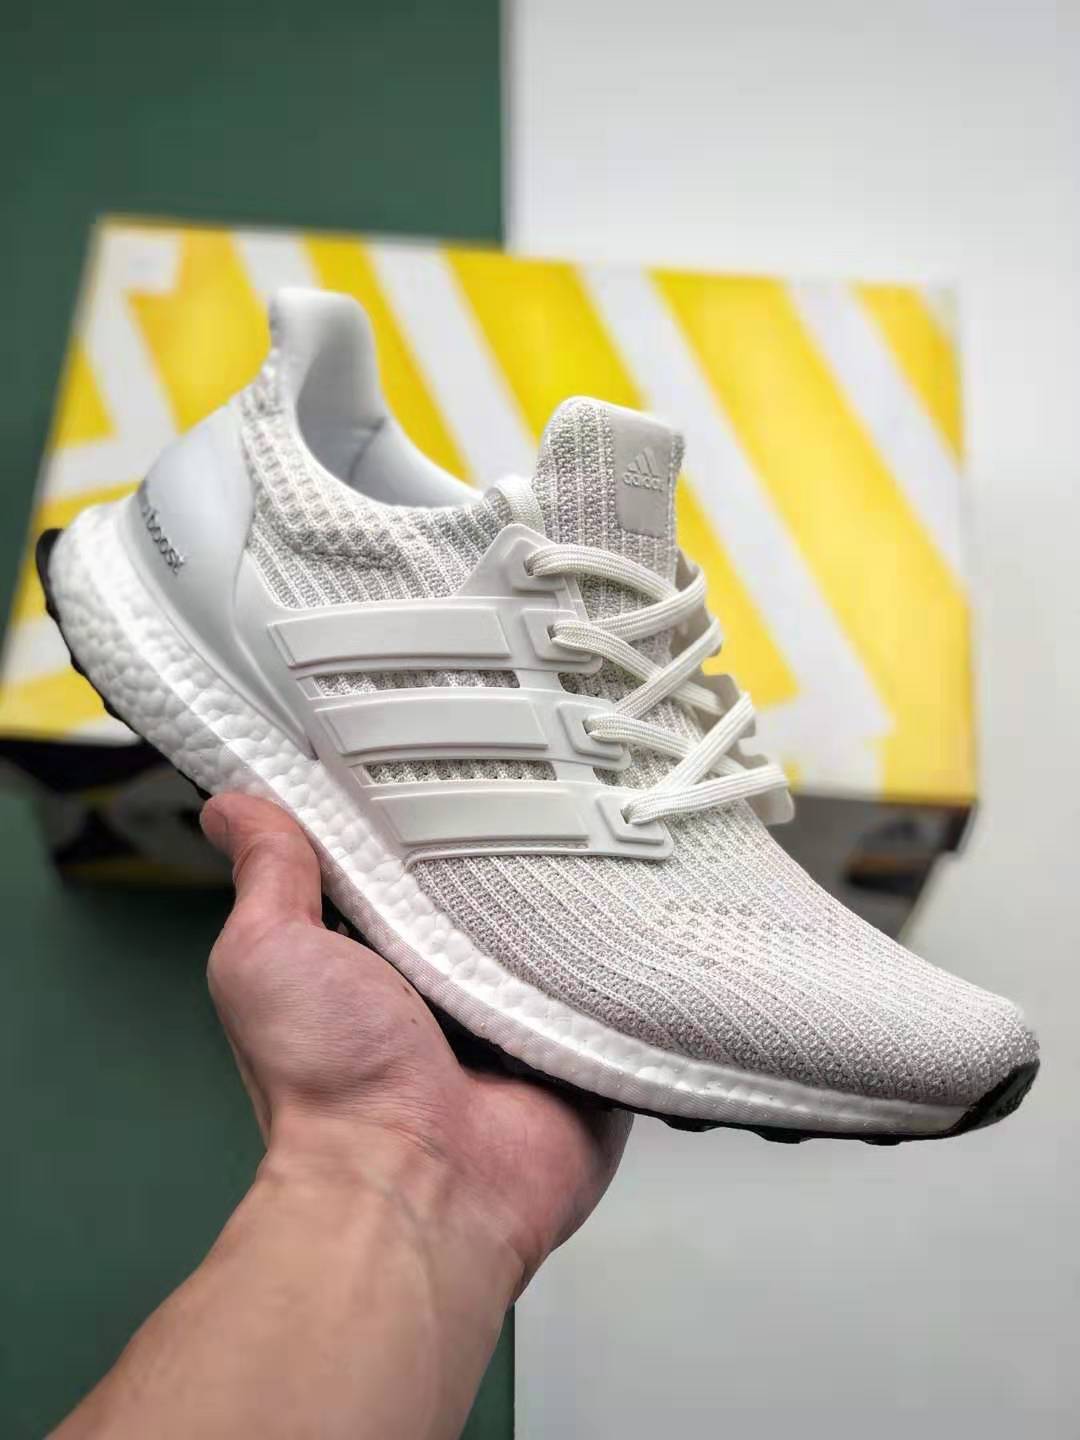 Adidas UltraBoost 4.0 'Triple White' BB6168 - Limited Edition!